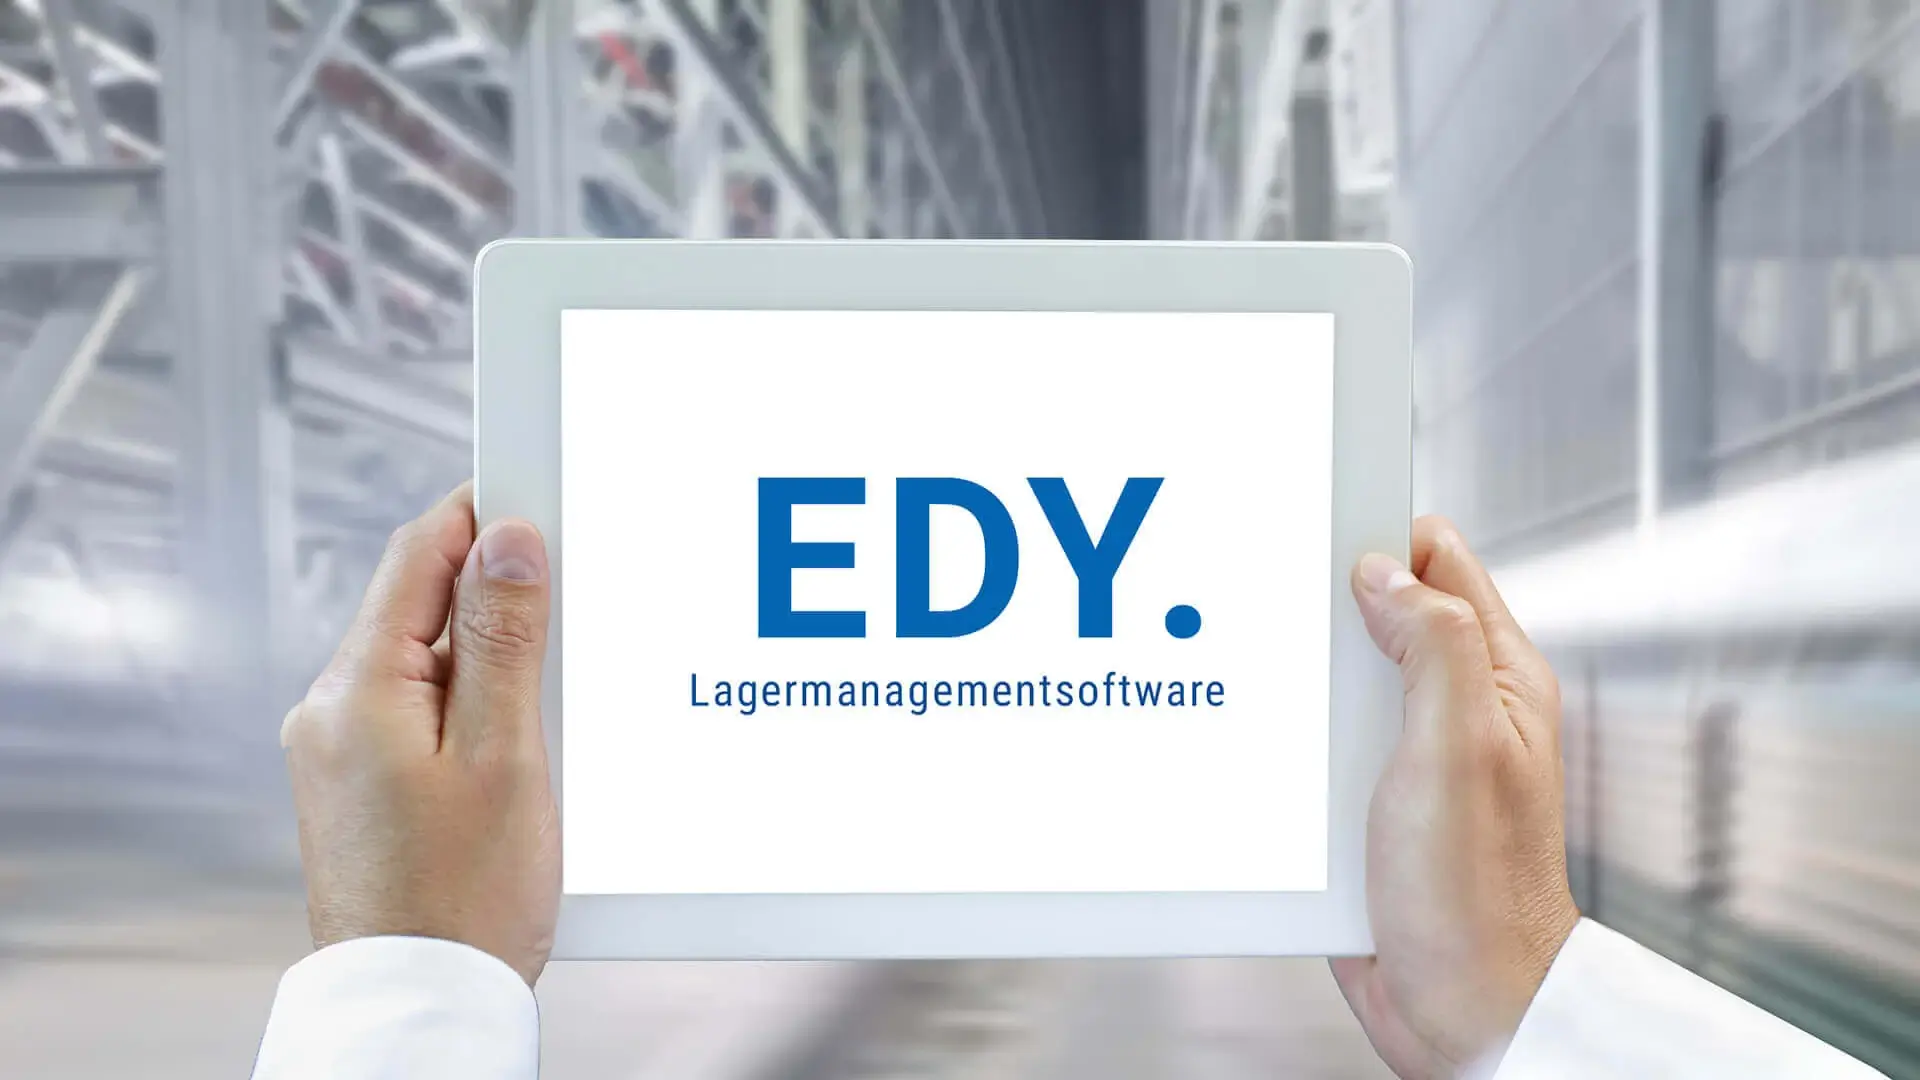 tablet-mfi-innovation-edy-material-flow-and-storage-management-software-demo-picture